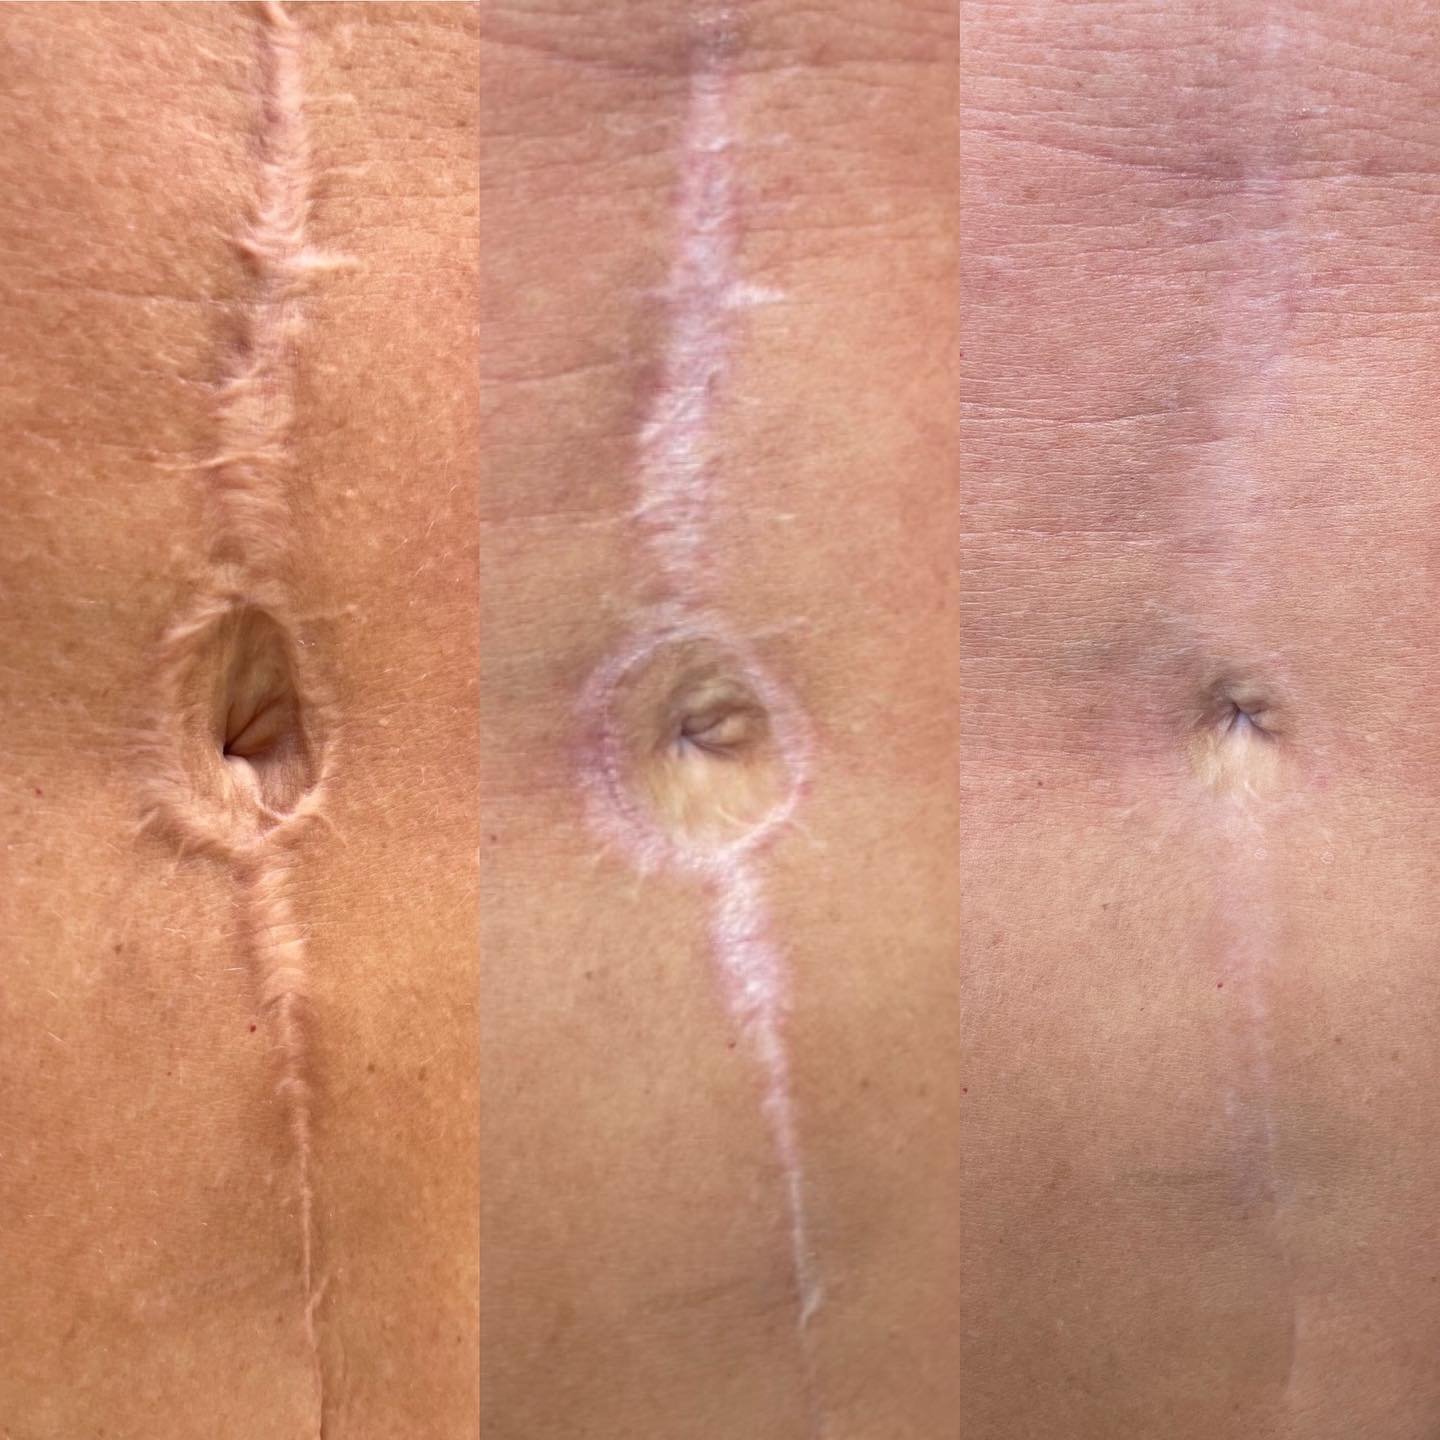 Surgical Mark Camouflage | Scar Camouflage Treatments